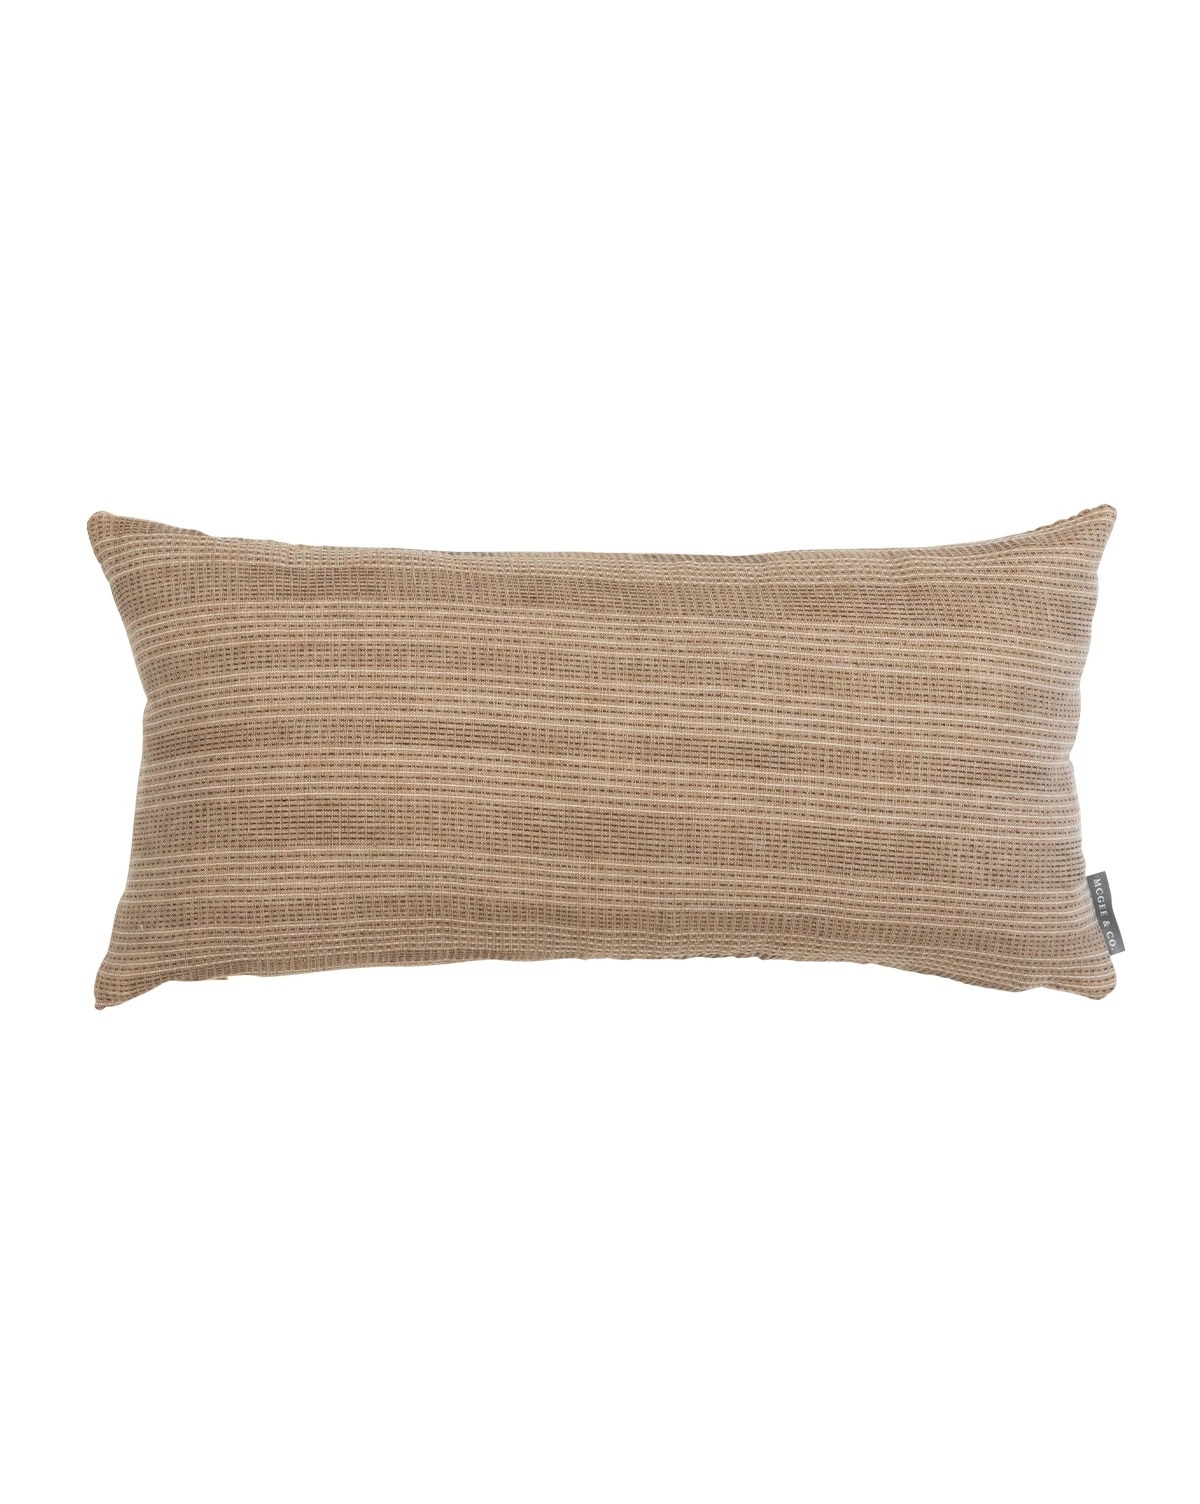 CASSIA VINTAGE NO. 1 PILLOW WITHOUT INSERT - 12" x 24" - Image 0